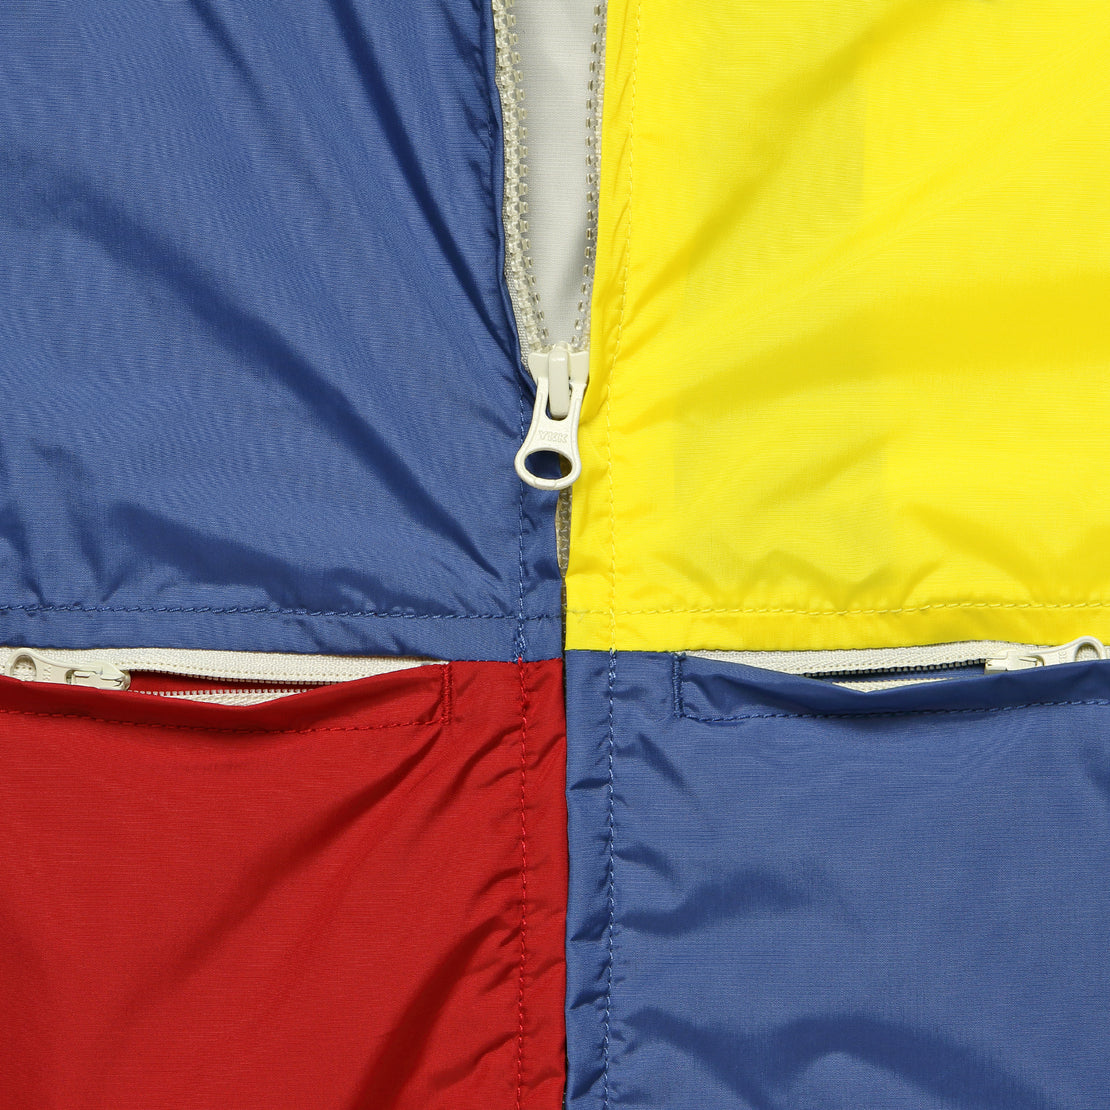 Nylon Panel Boat Jacket - Blue/Yellow/Red - BEAMS+ - STAG Provisions - Outerwear - Coat / Jacket